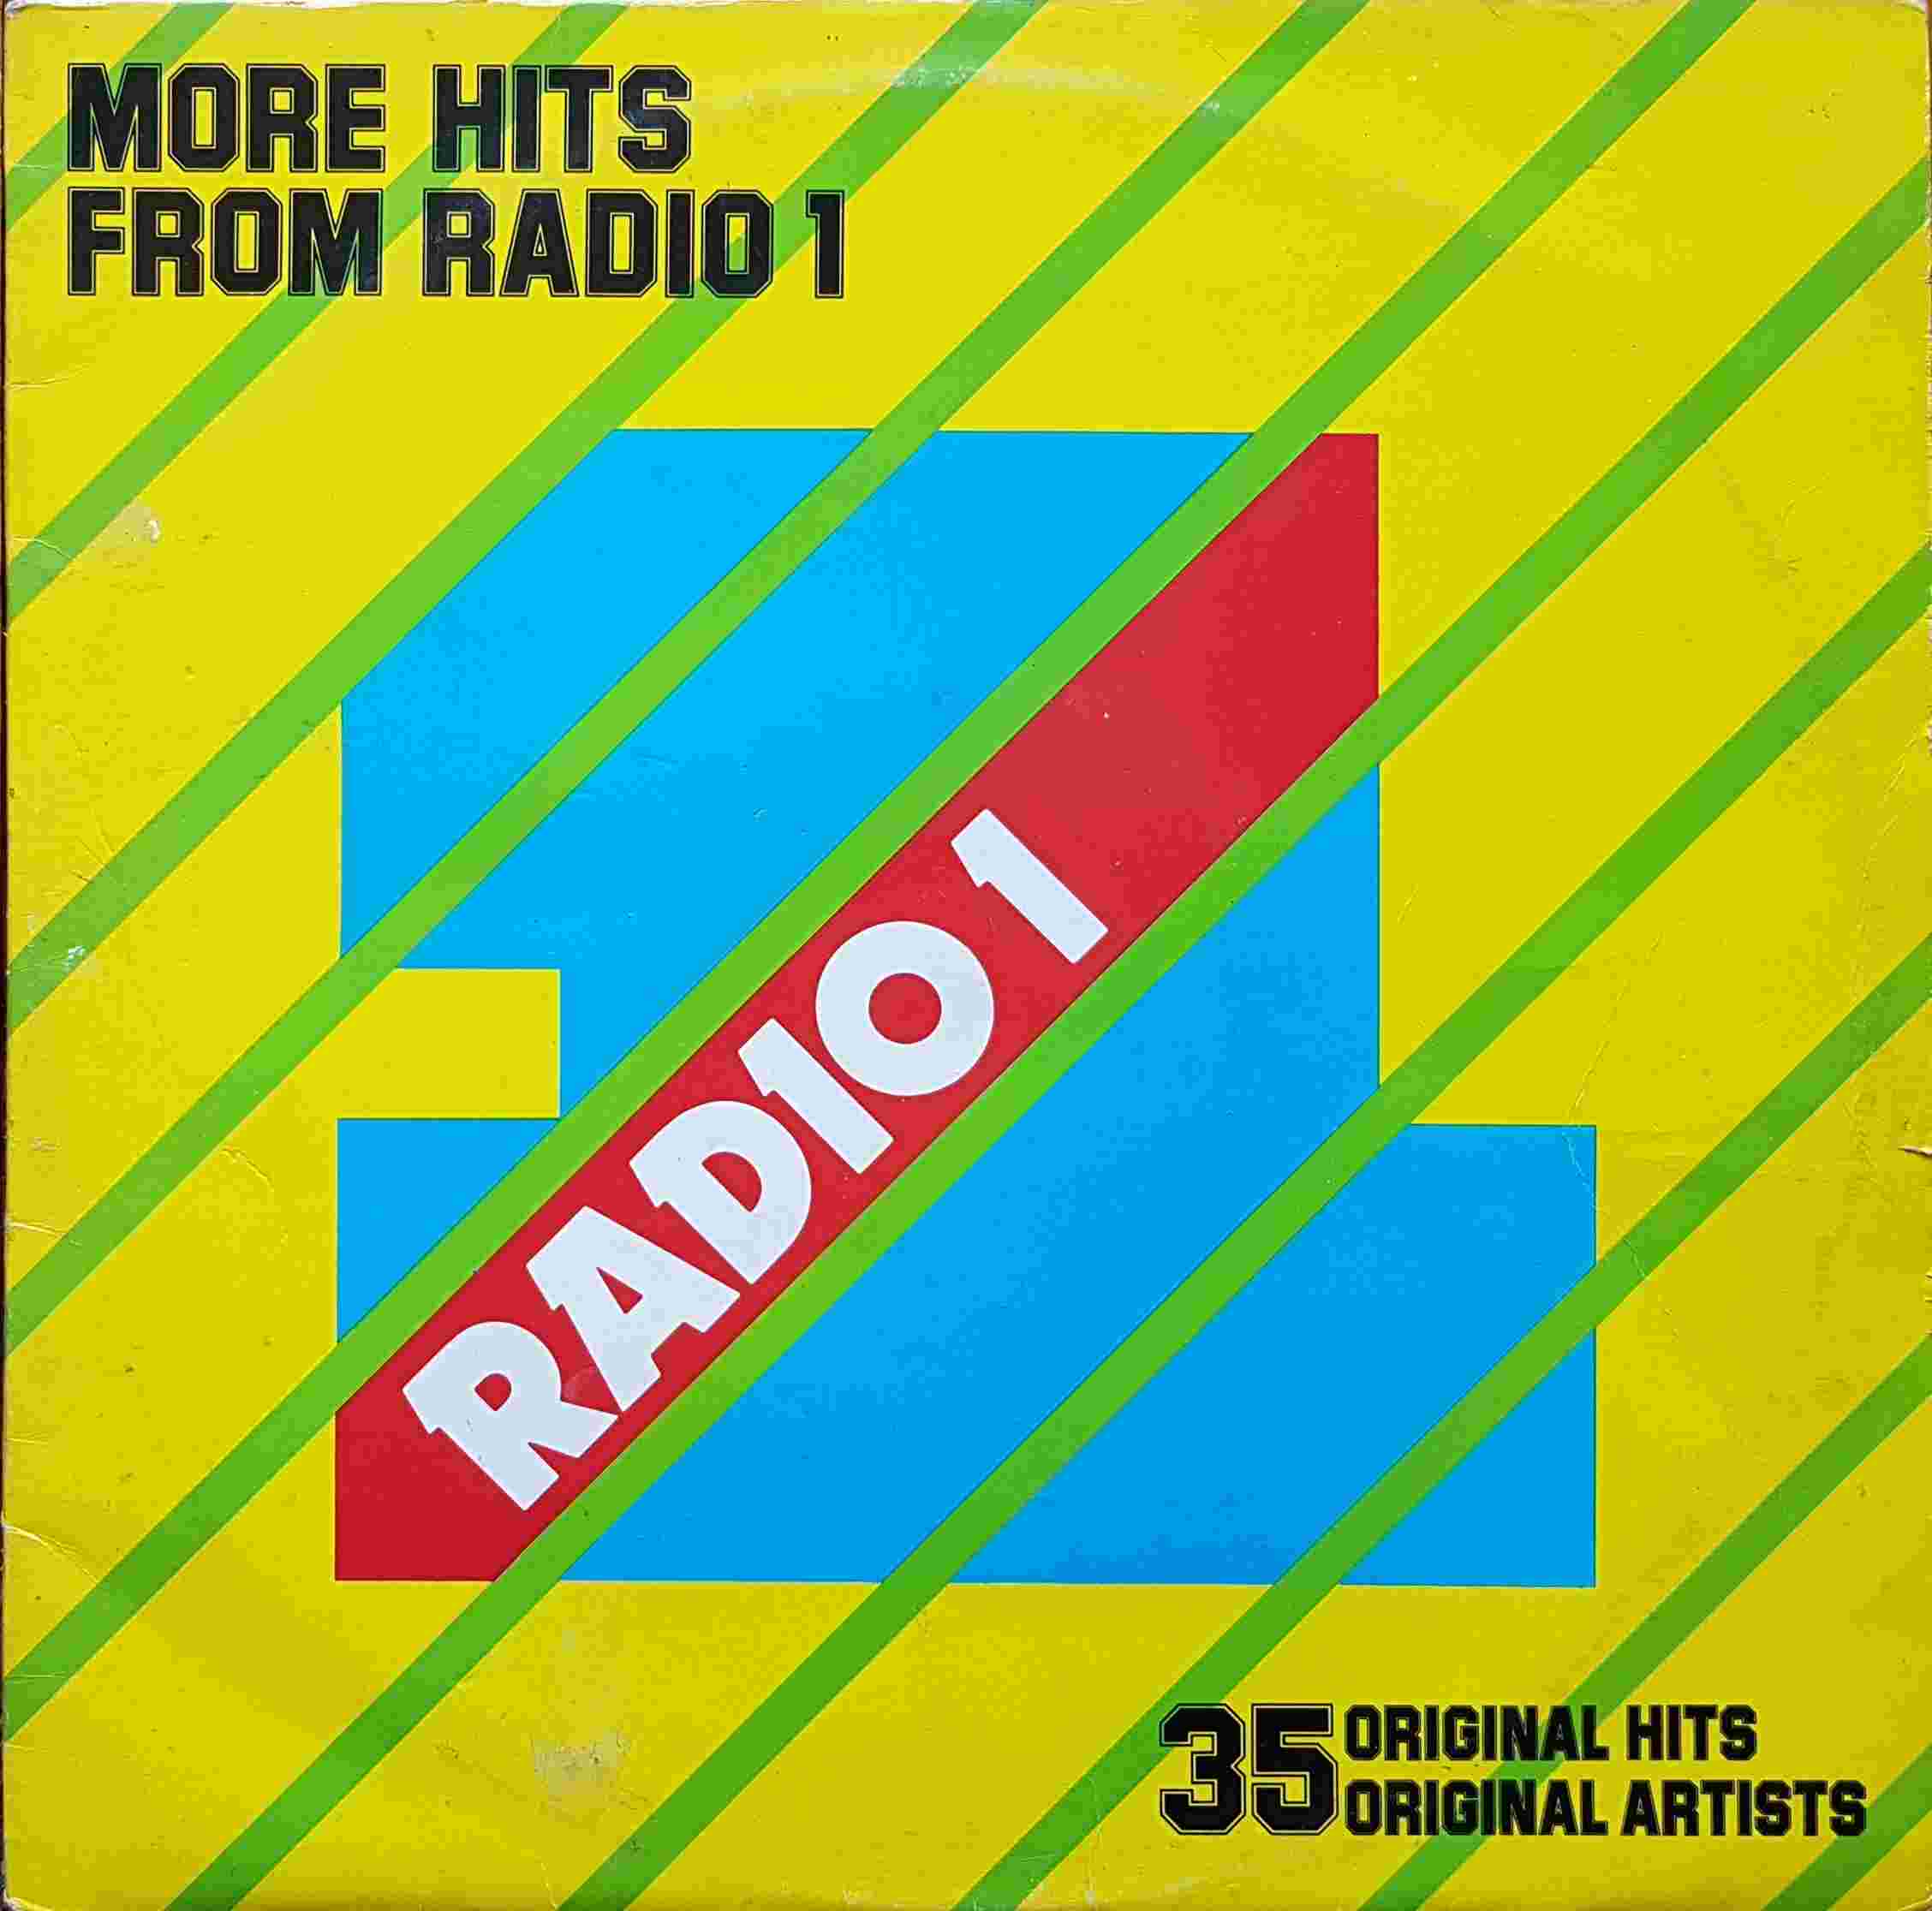 Picture of BEDP 015 More hits from Radio 1 by artist Various from the BBC albums - Records and Tapes library